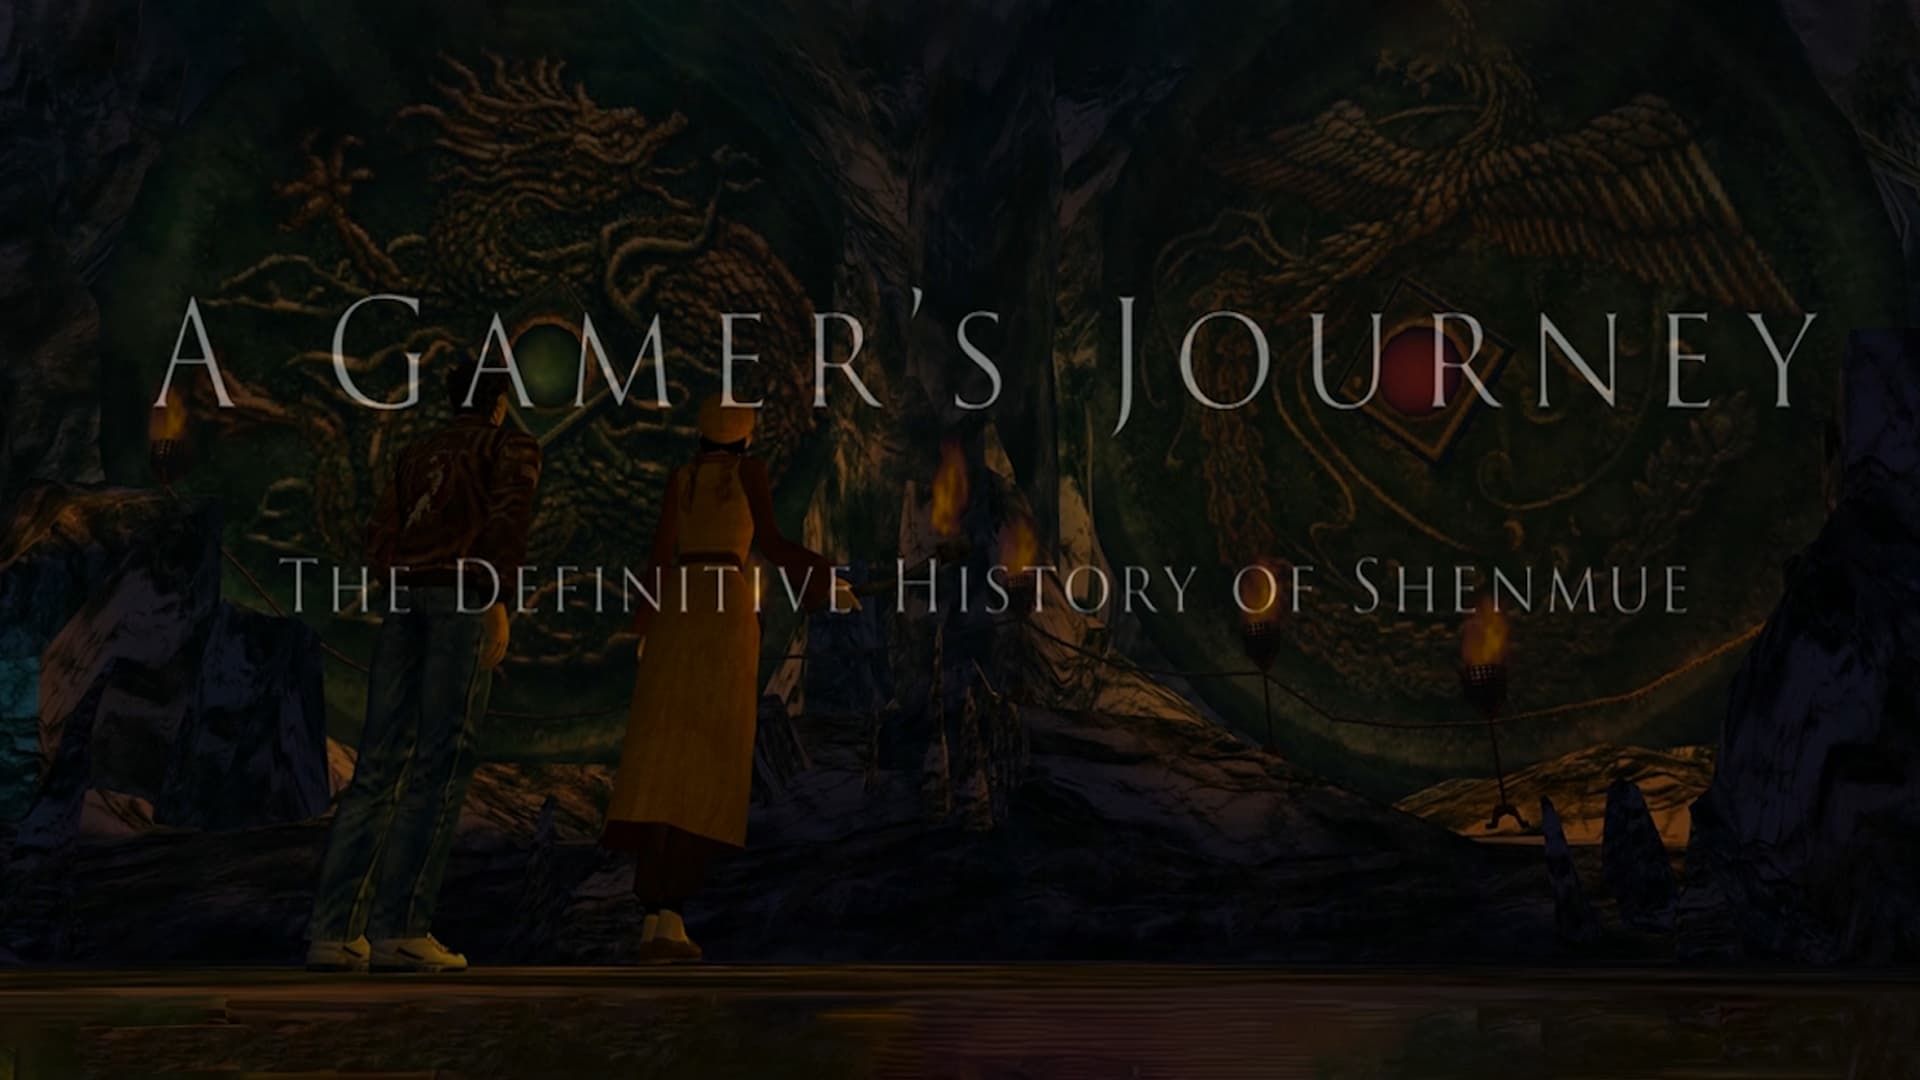 A Gamer's Journey: The Definitive History of Shenmue background